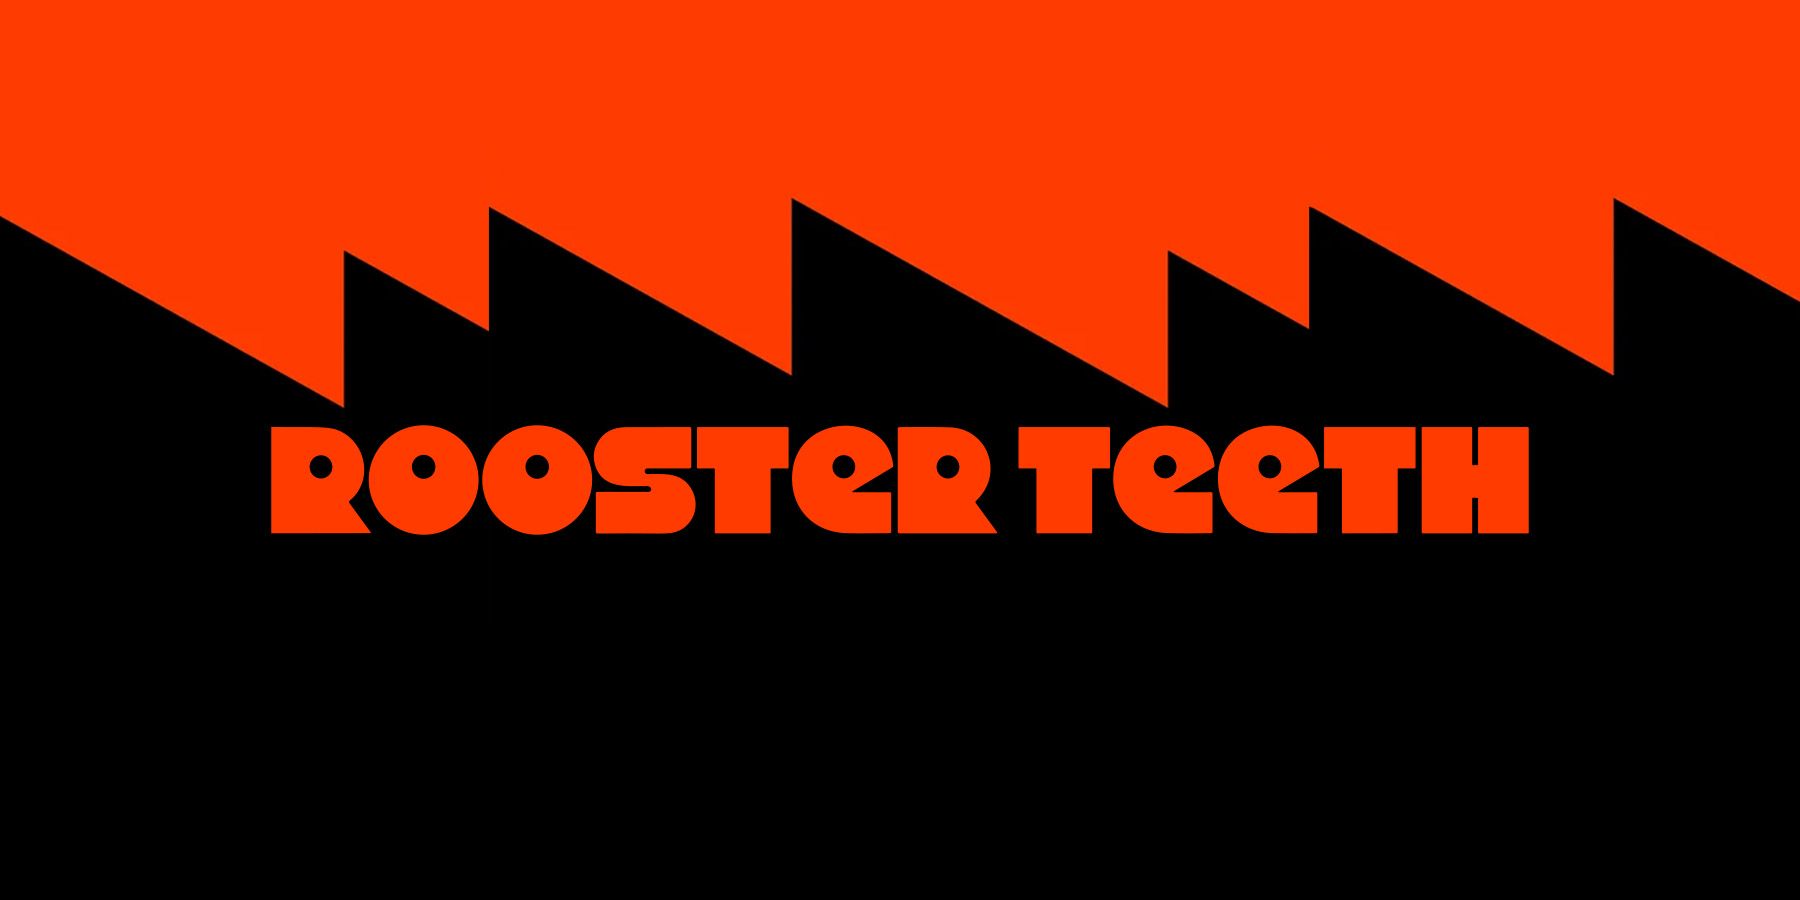 Rooster Teeth logo on black and orange abstract background